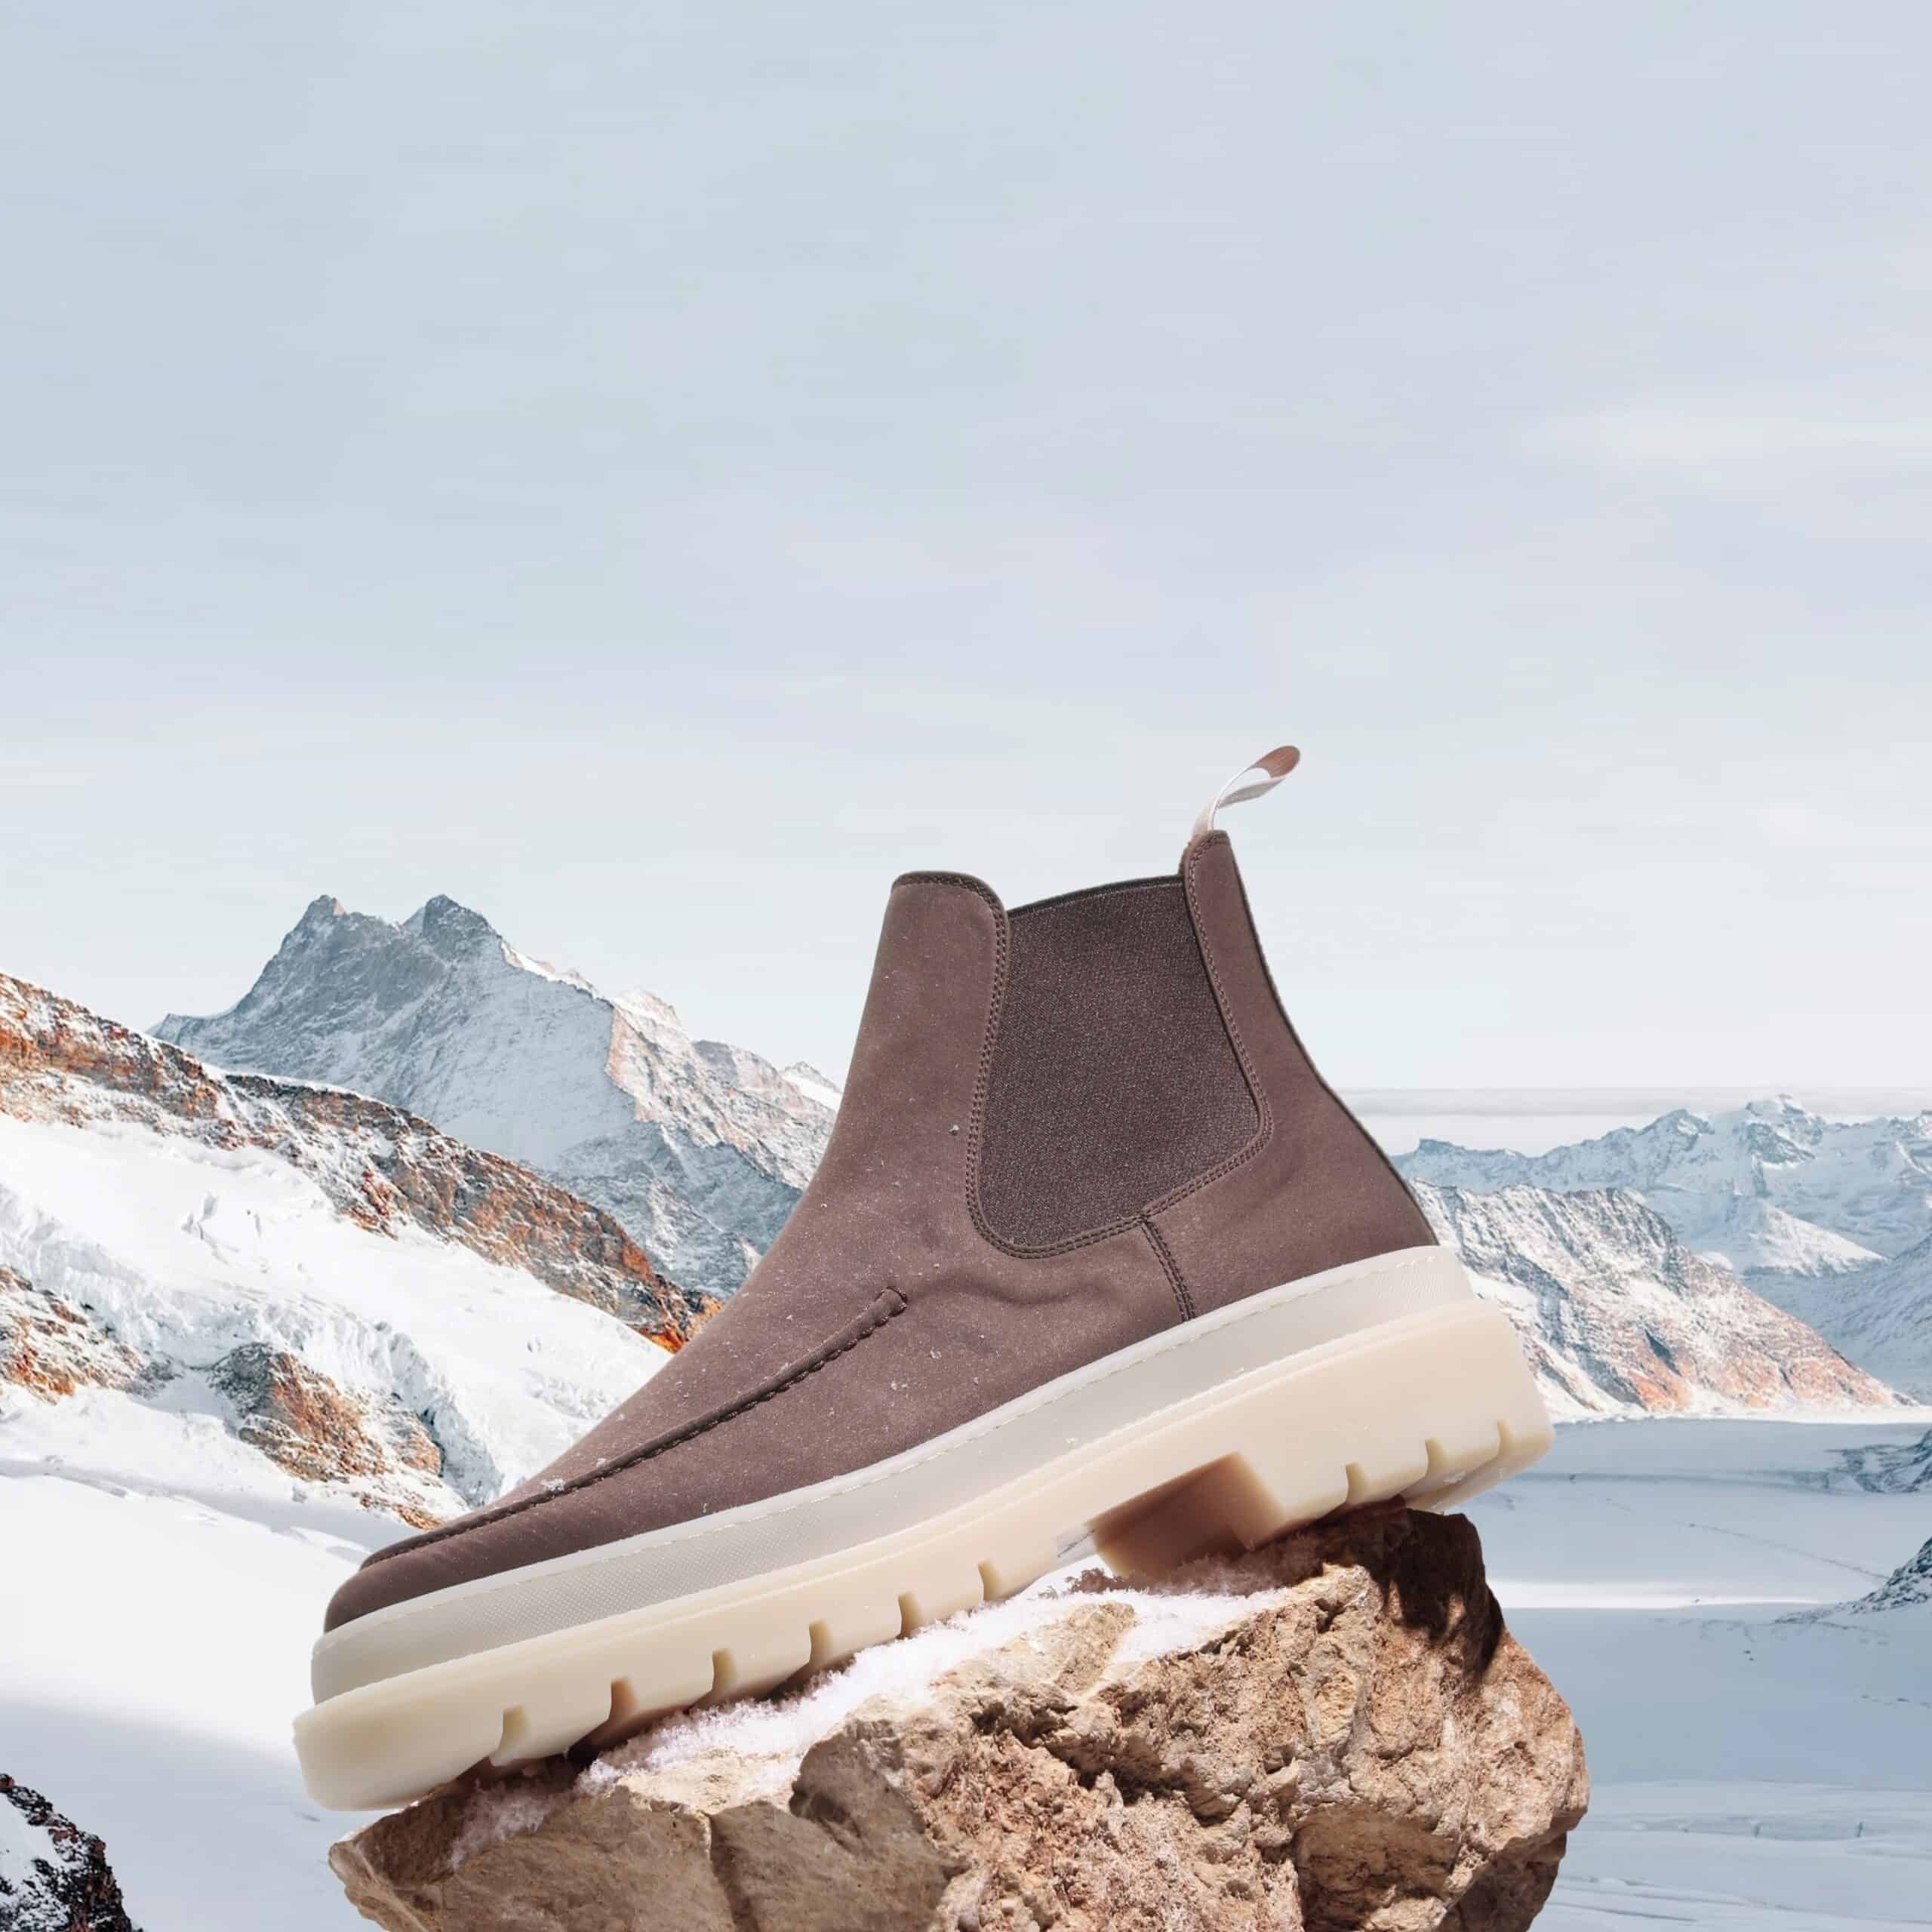 a snow chelsea boot on top of a rock